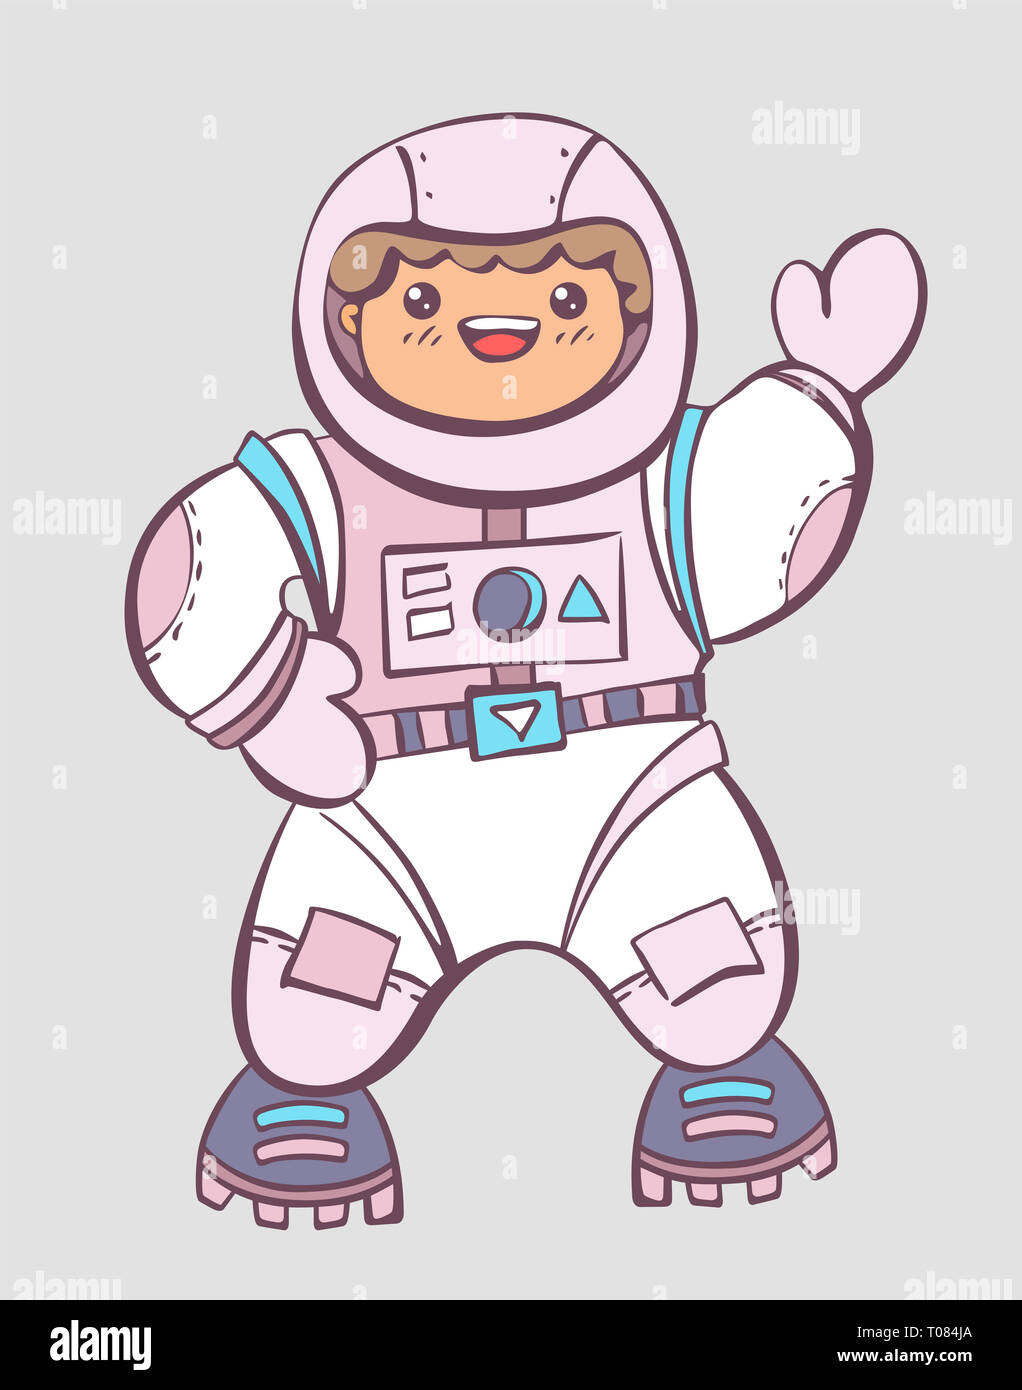 Cartoon astronaut character in space suit comic illustration Stock